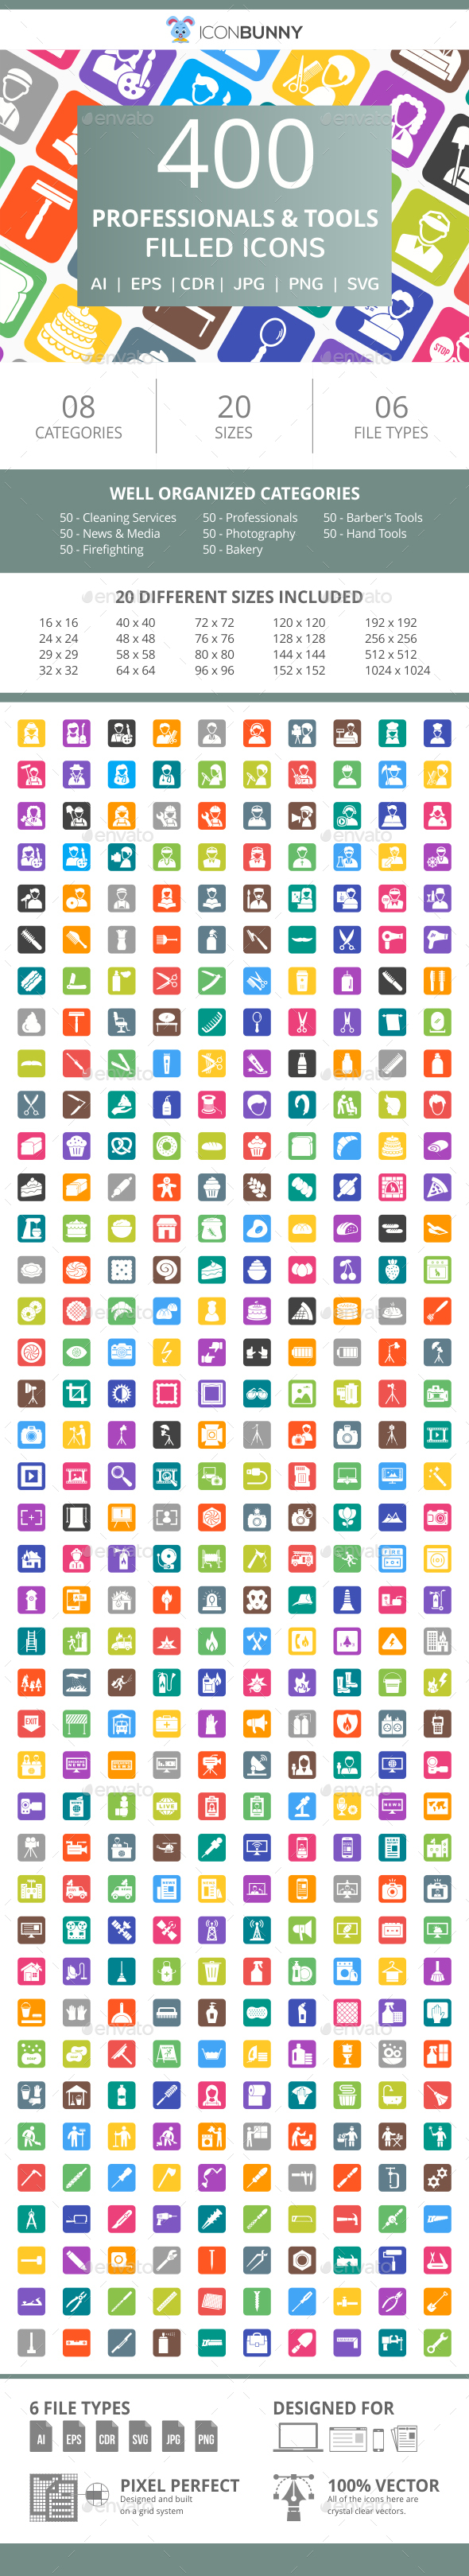 400 Professionals & Their tools Filled Round Corner Icons